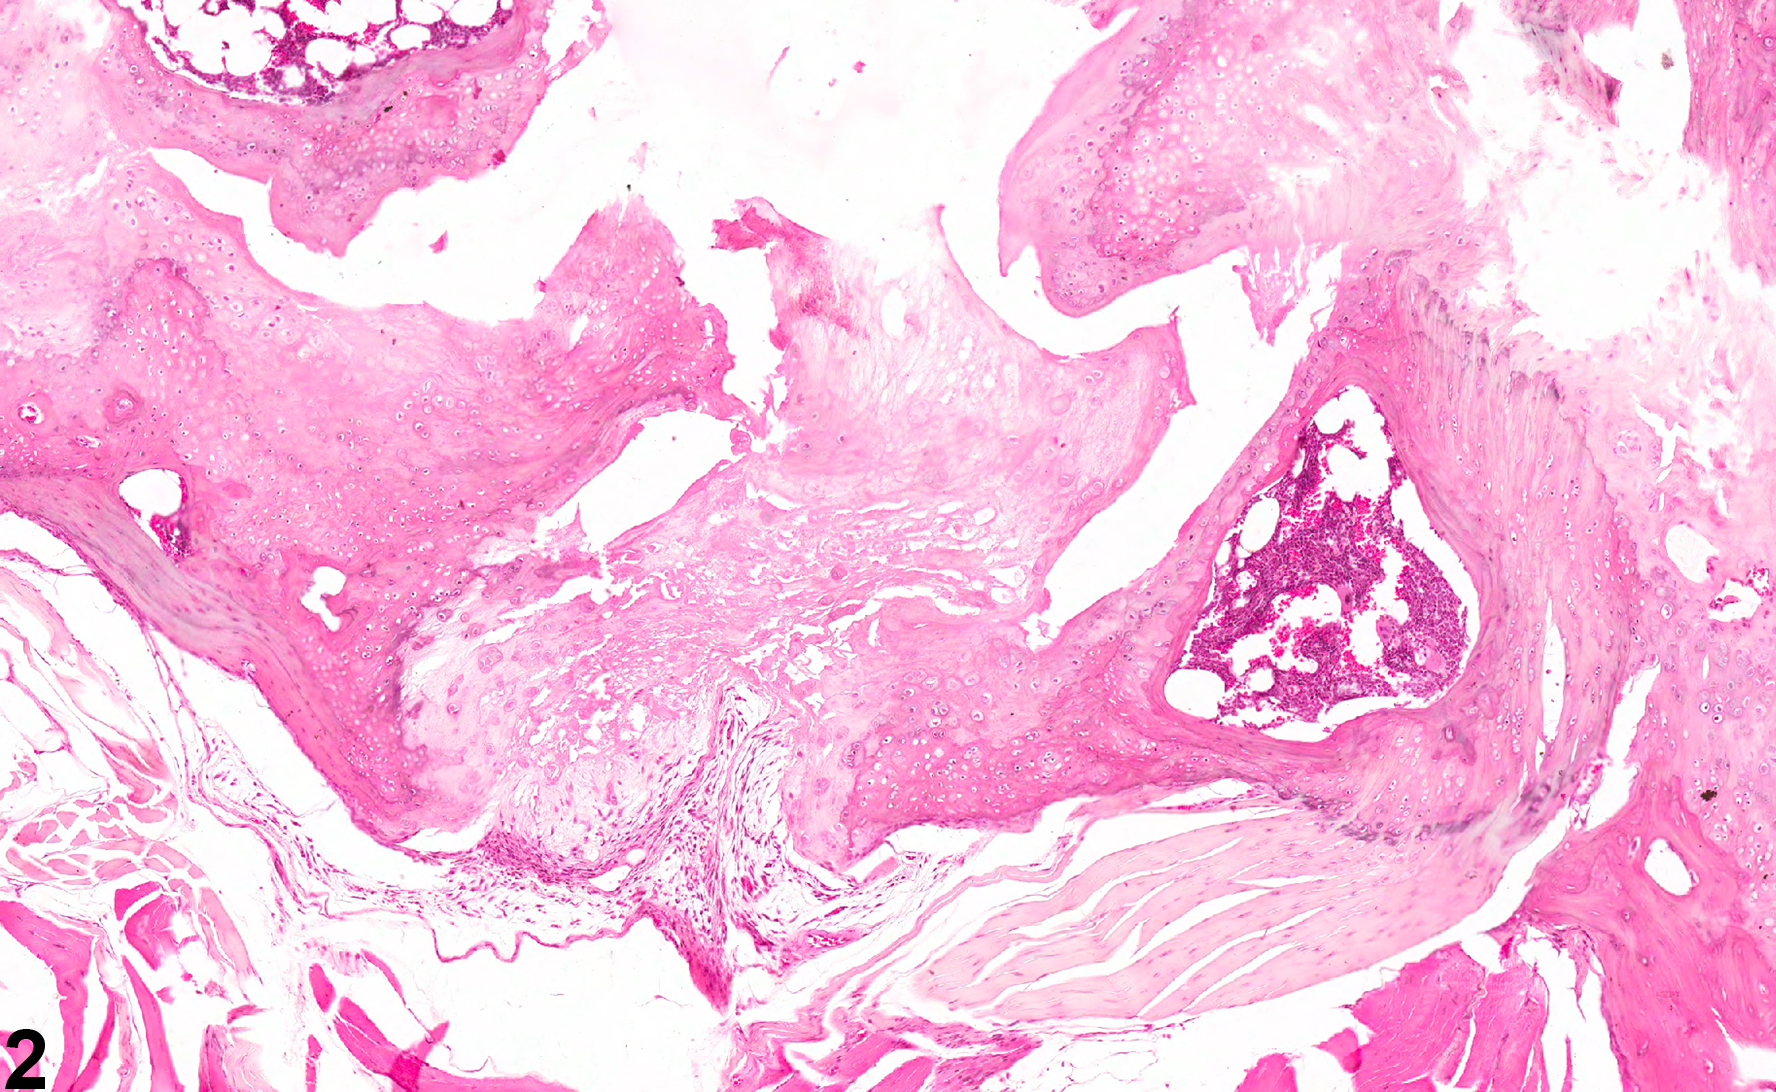 Image of necrosis in the bone from a male B6C3F1/N mouse in a chronic study